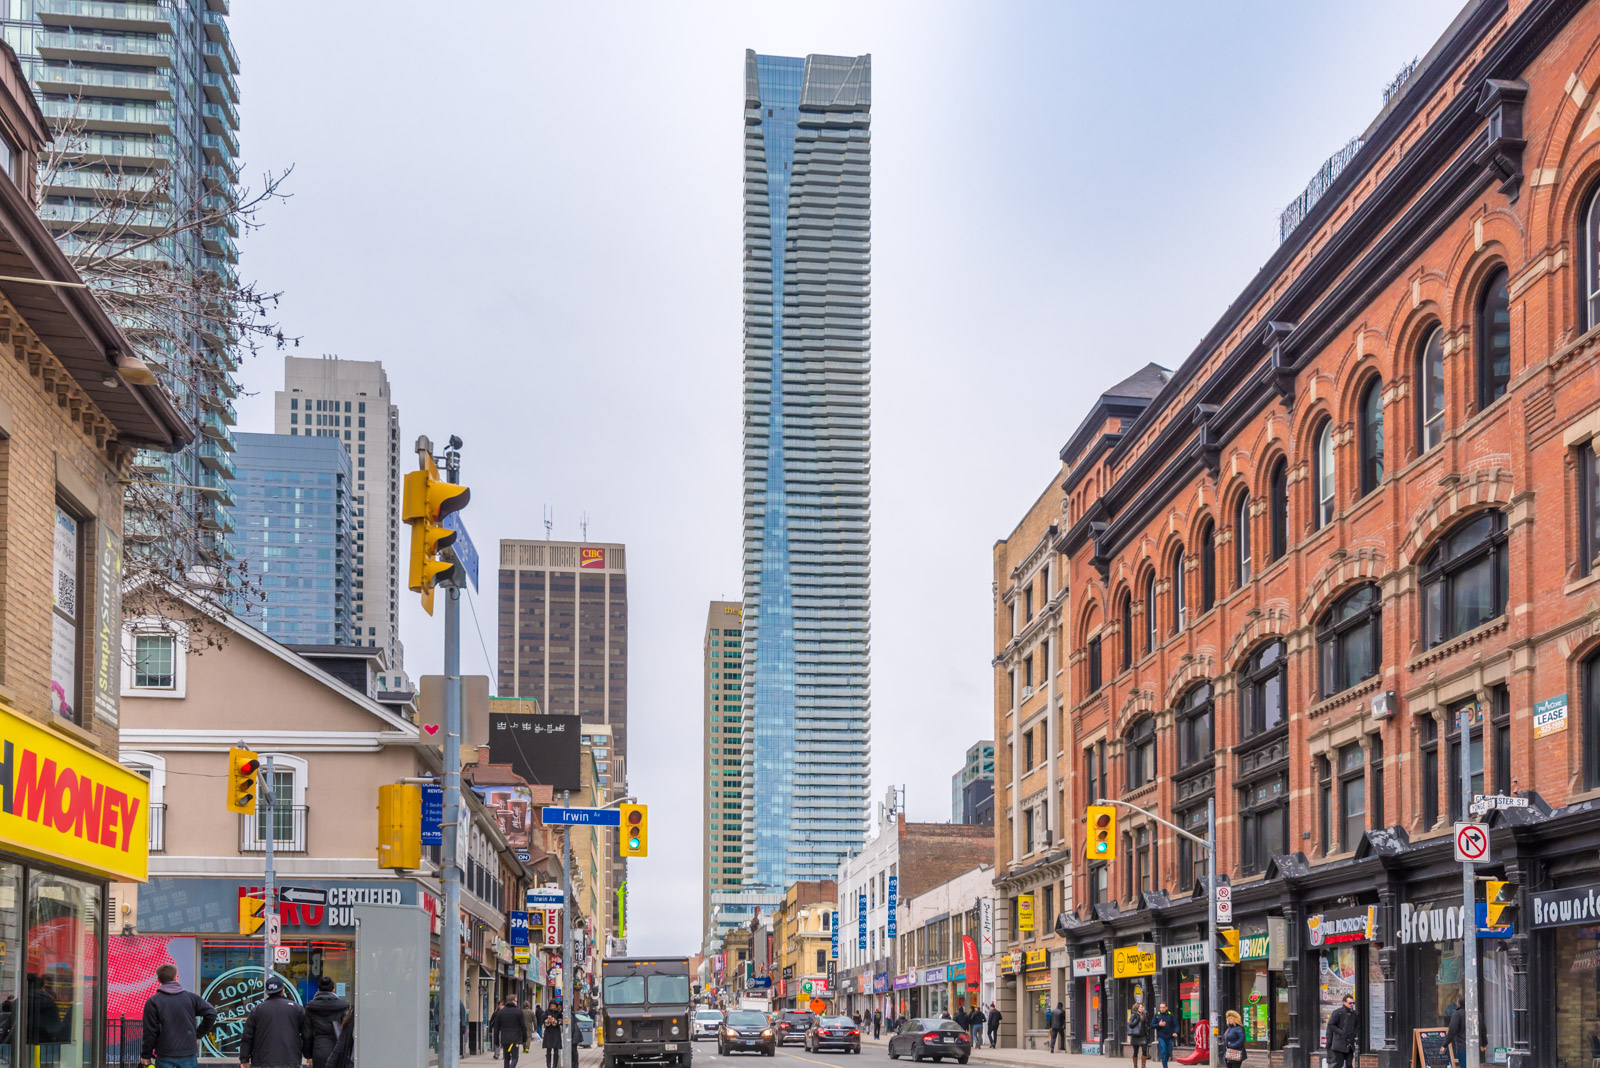 1 Bloor seen from a distance, showing shops, cars, buildings and more. Picture: Wins Lai, Toronto Real Estate Agent